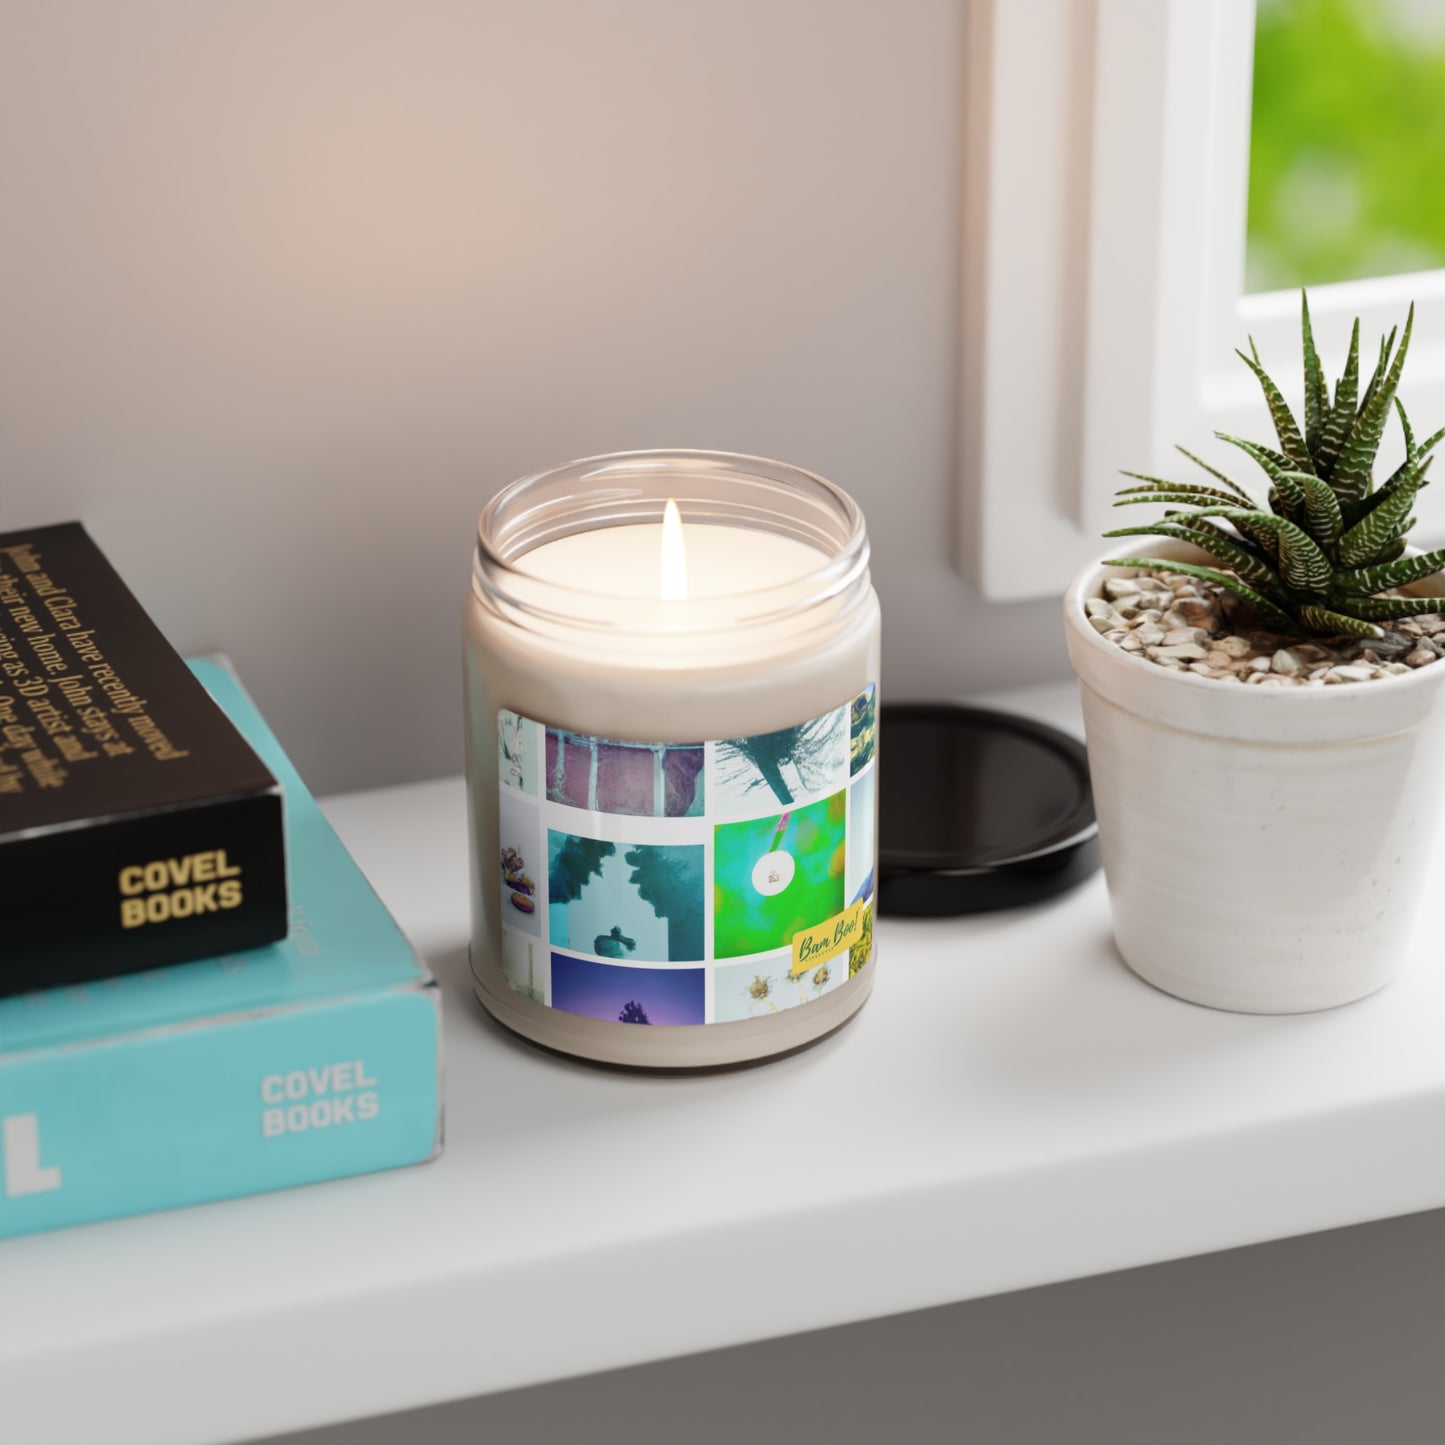 Connecting the Natural World: A Mixed Media Collage Exploration - Bam Boo! Lifestyle Eco-friendly Soy Candle